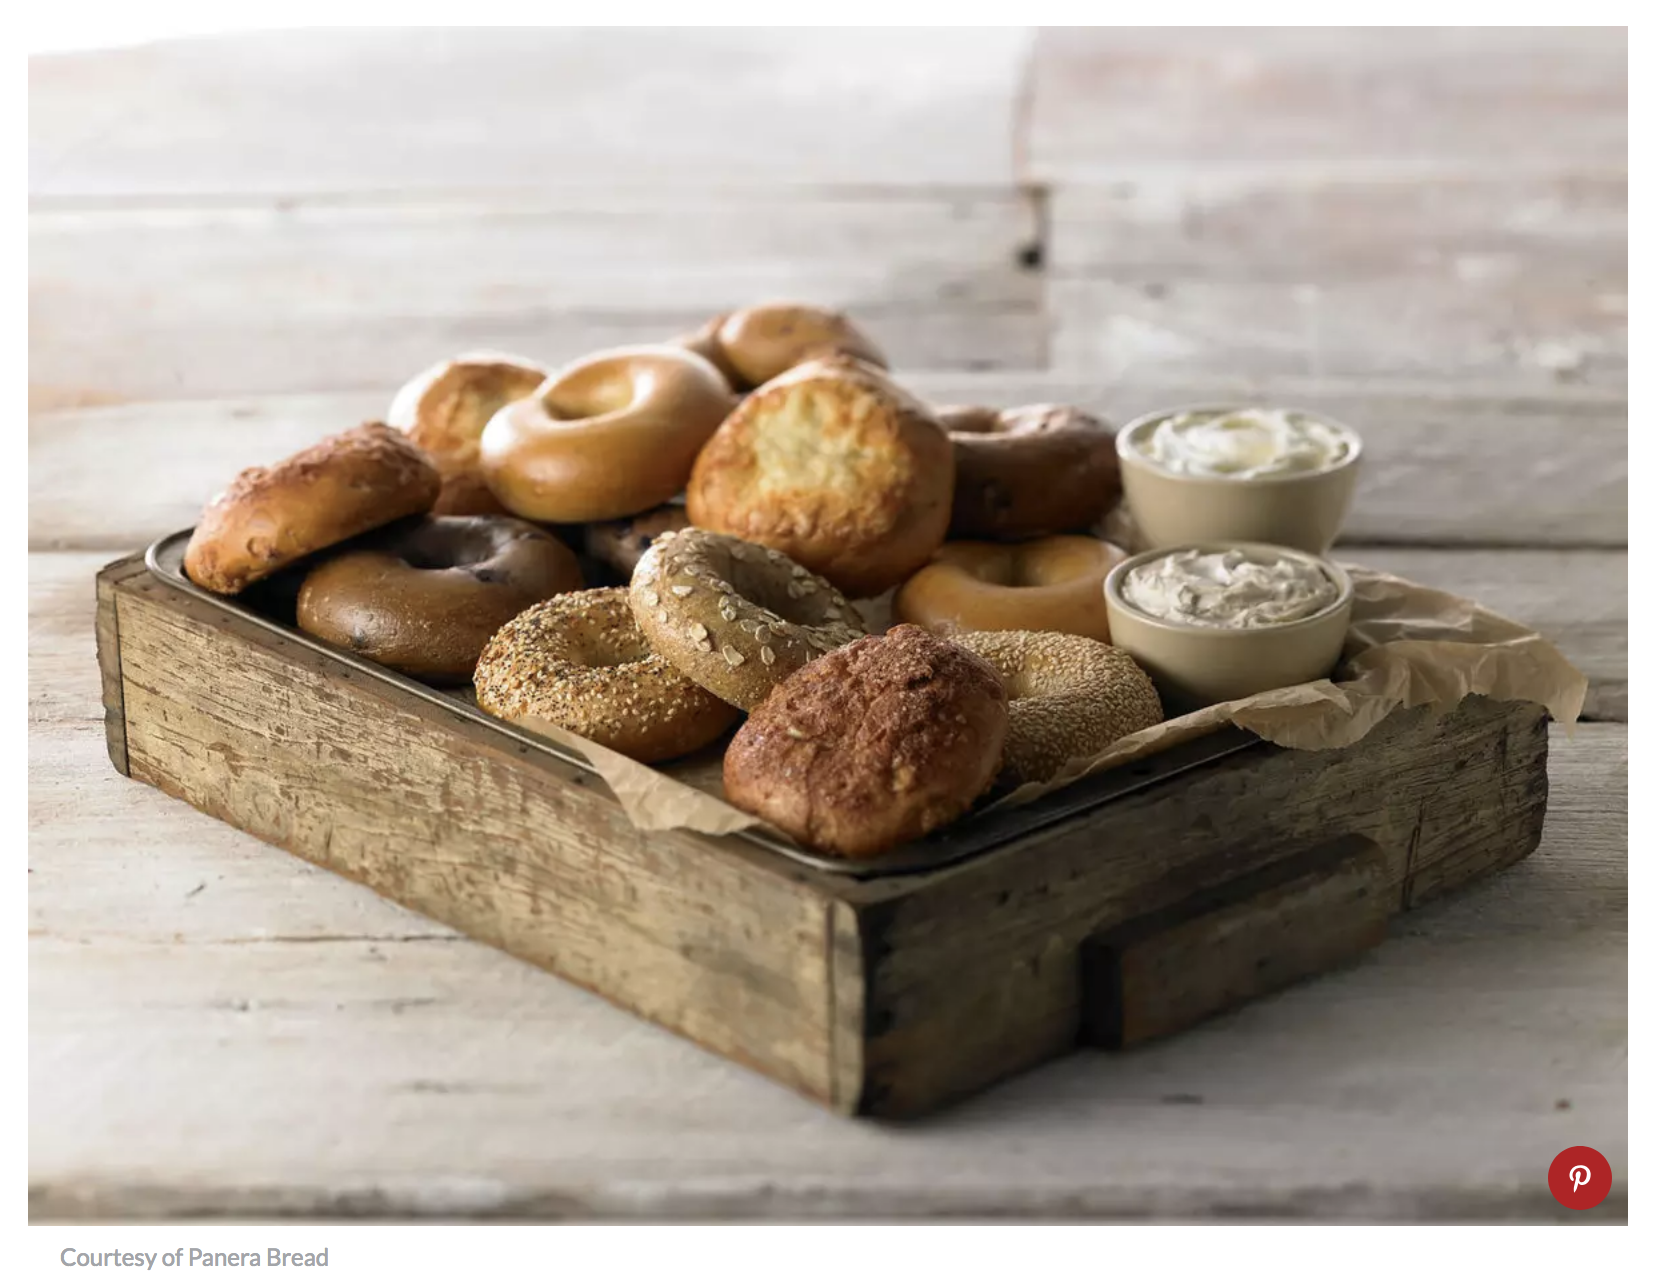 How to Get a Free Bagel from Panera Every Day for the Rest of the Year